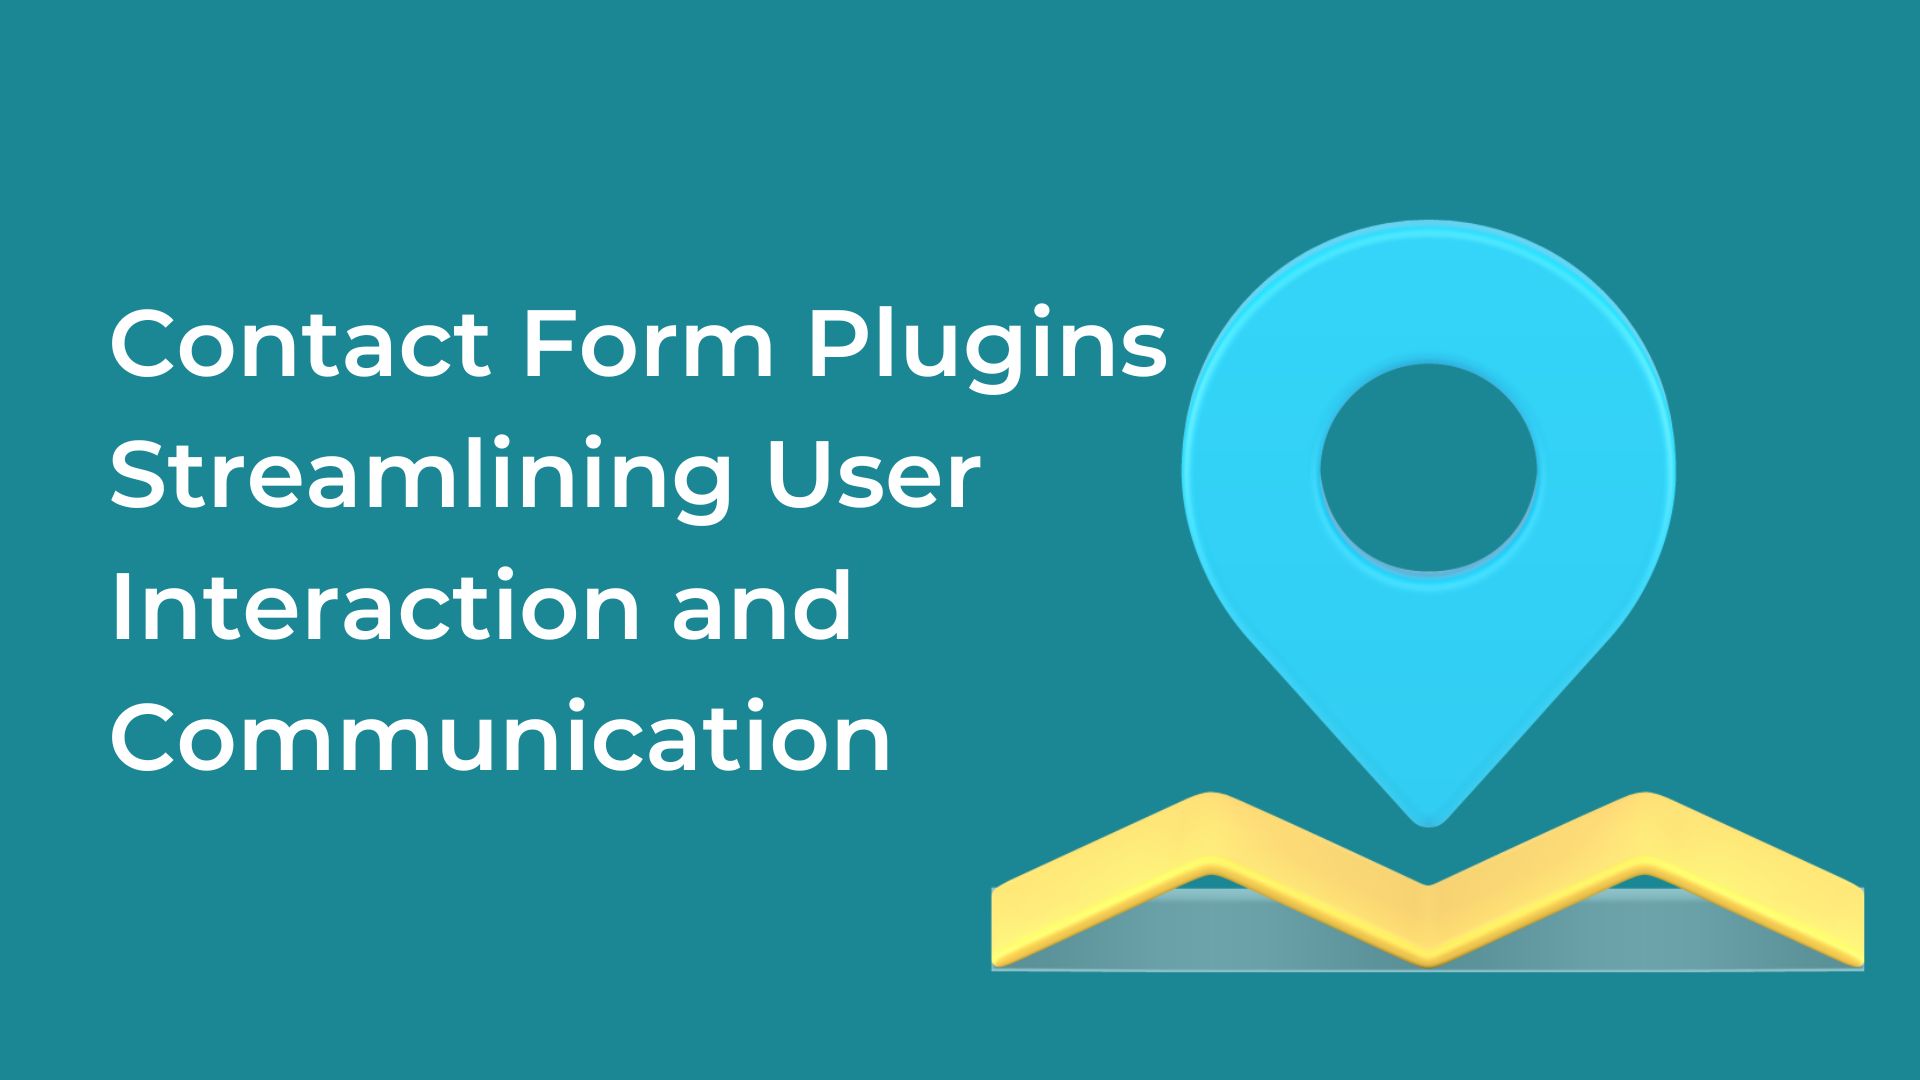 Contact Form Plugins ╼ Streamlining User Interaction and Communication